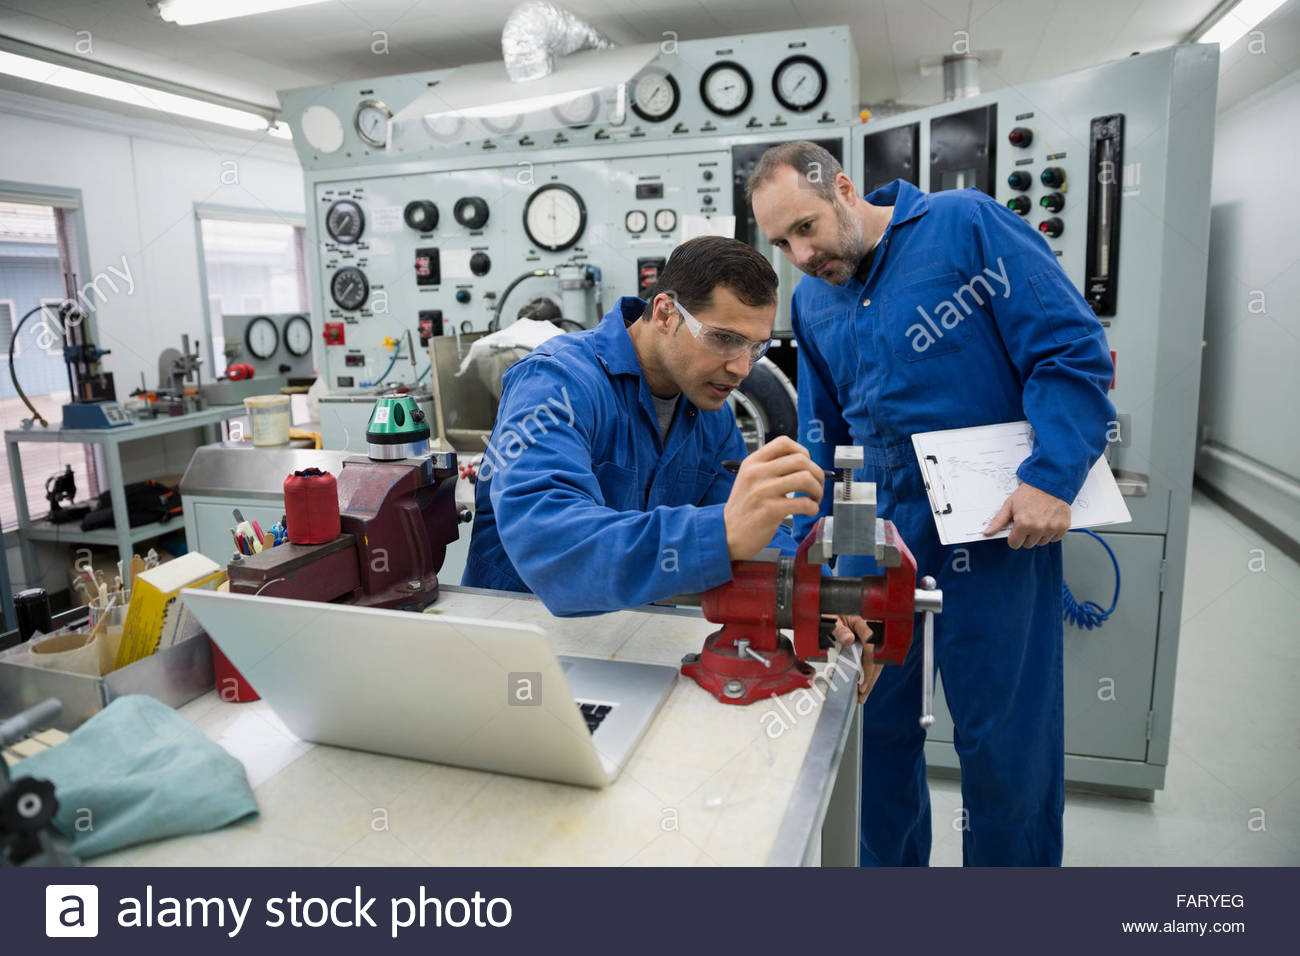 Helicopter mechanics using vise grip in workshop Stock Photo